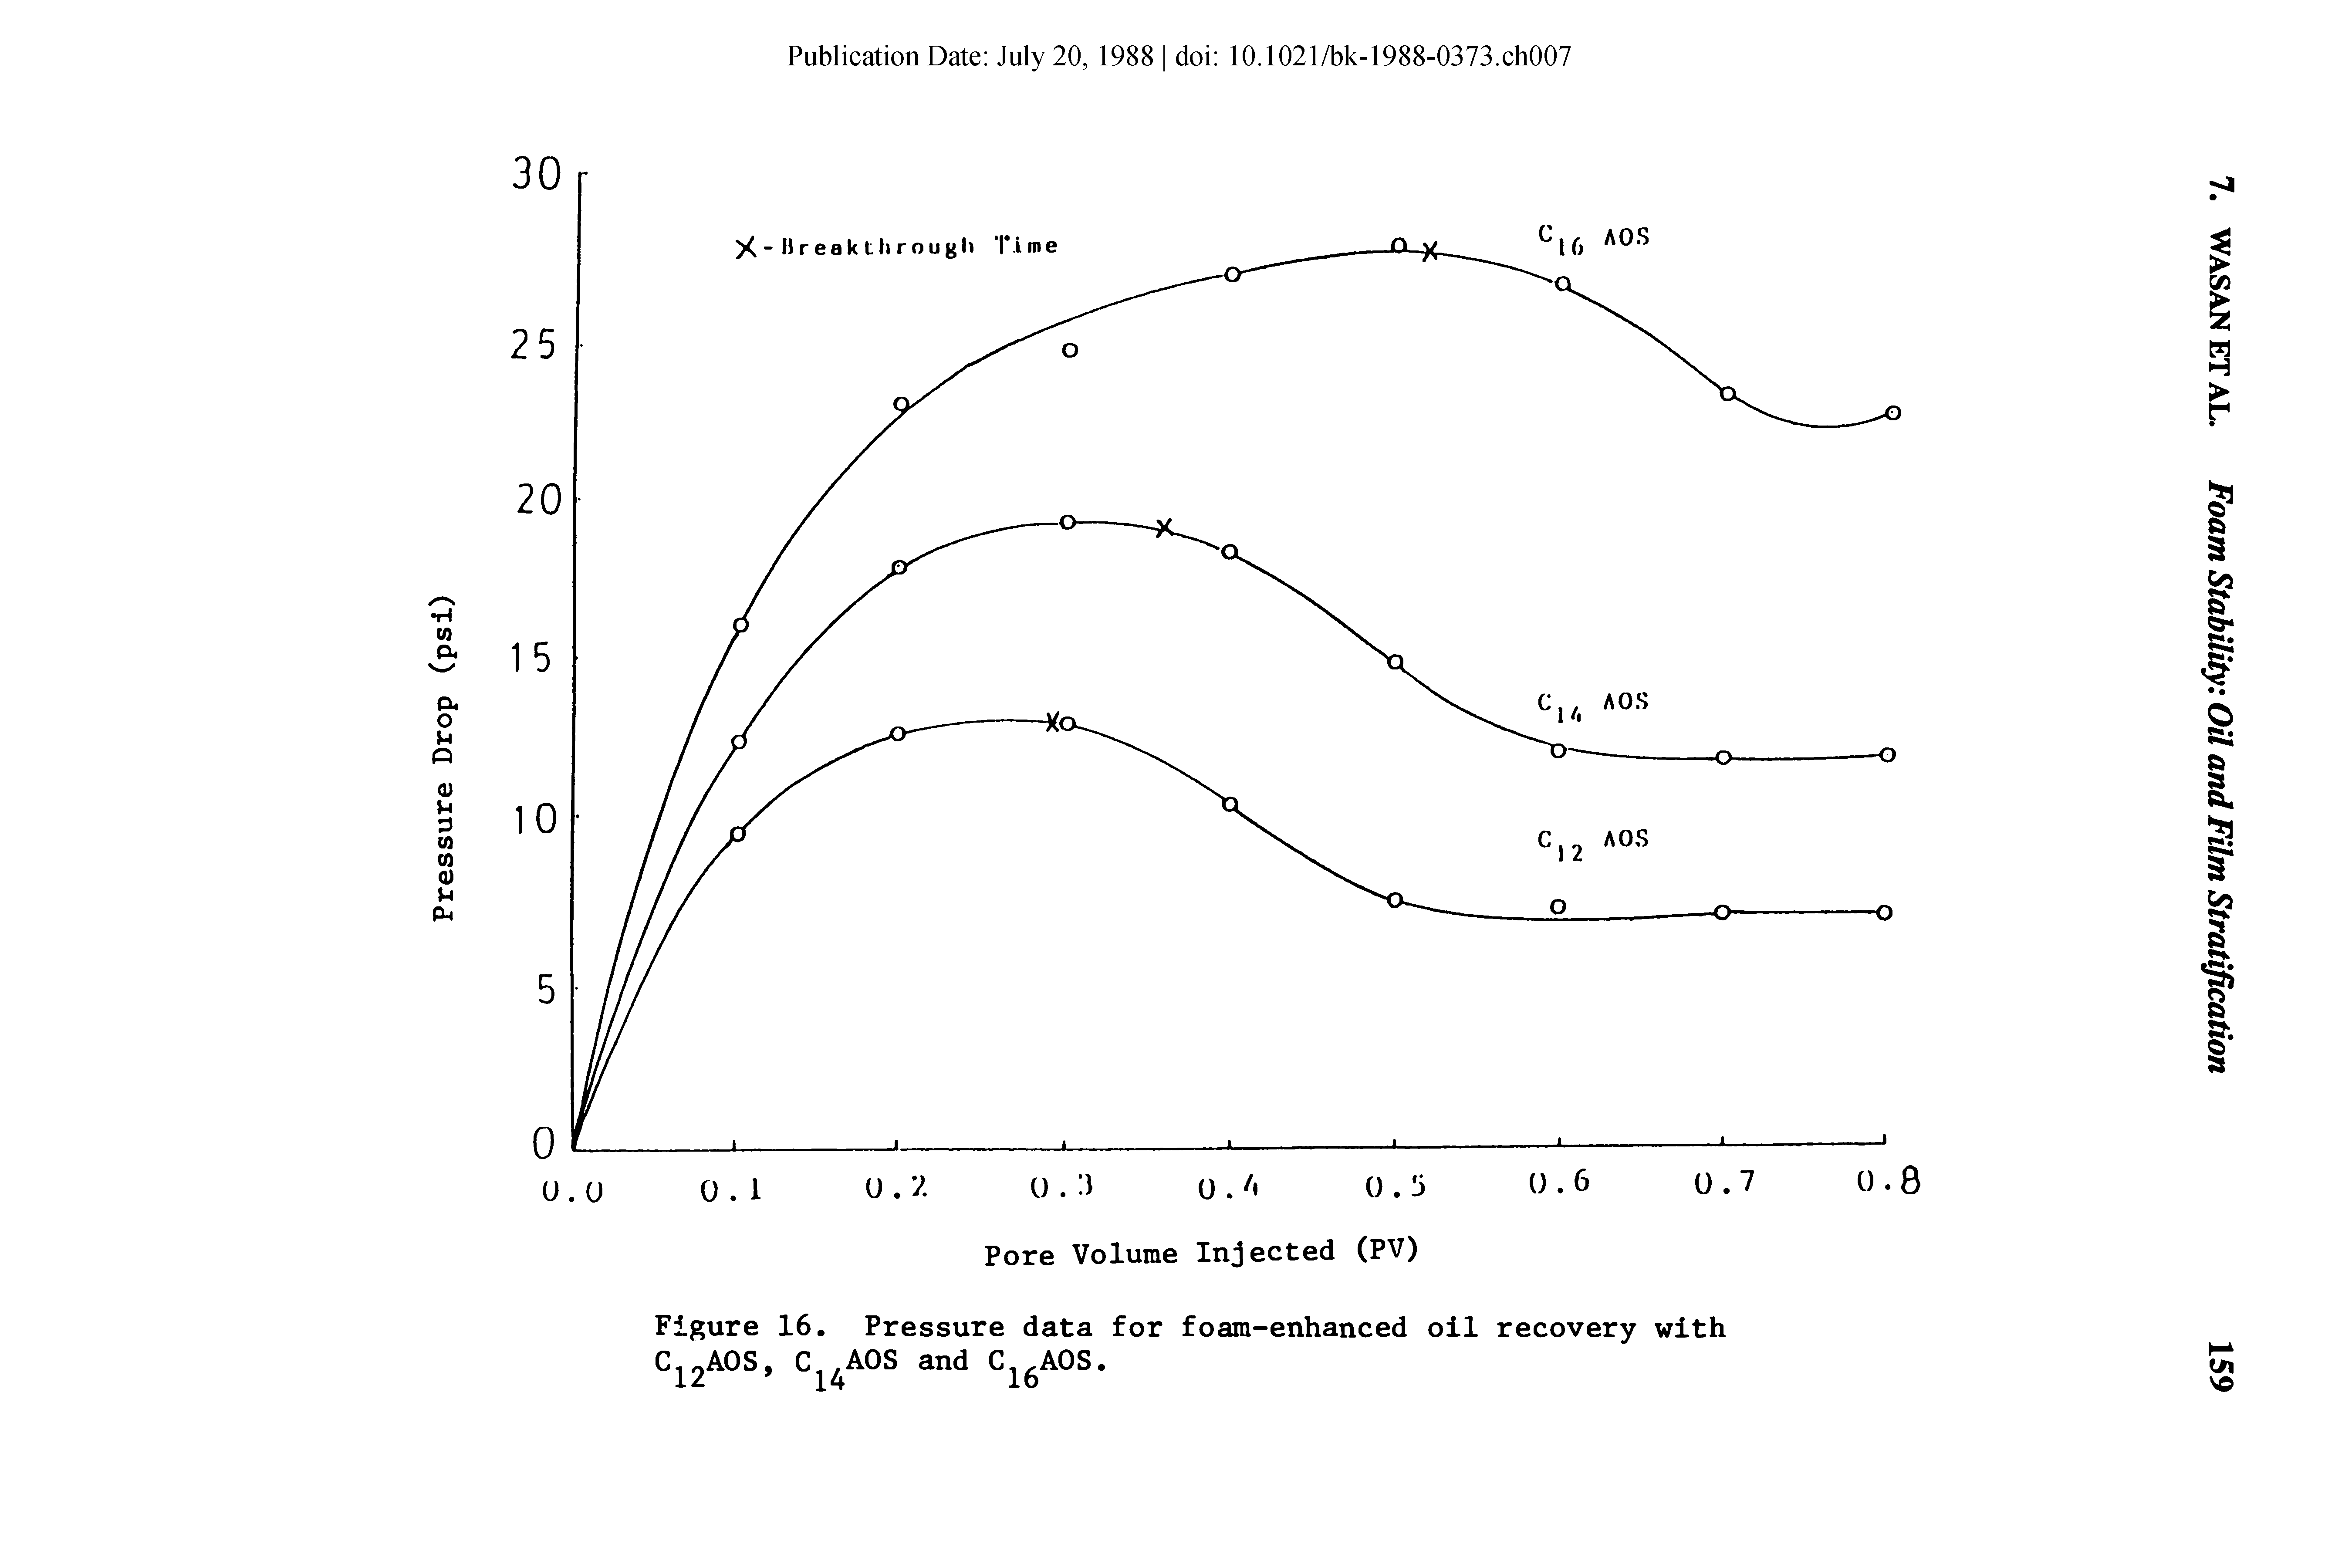 Figure 16. Pressure data for foam-enhanced oil recovery with C AOS.